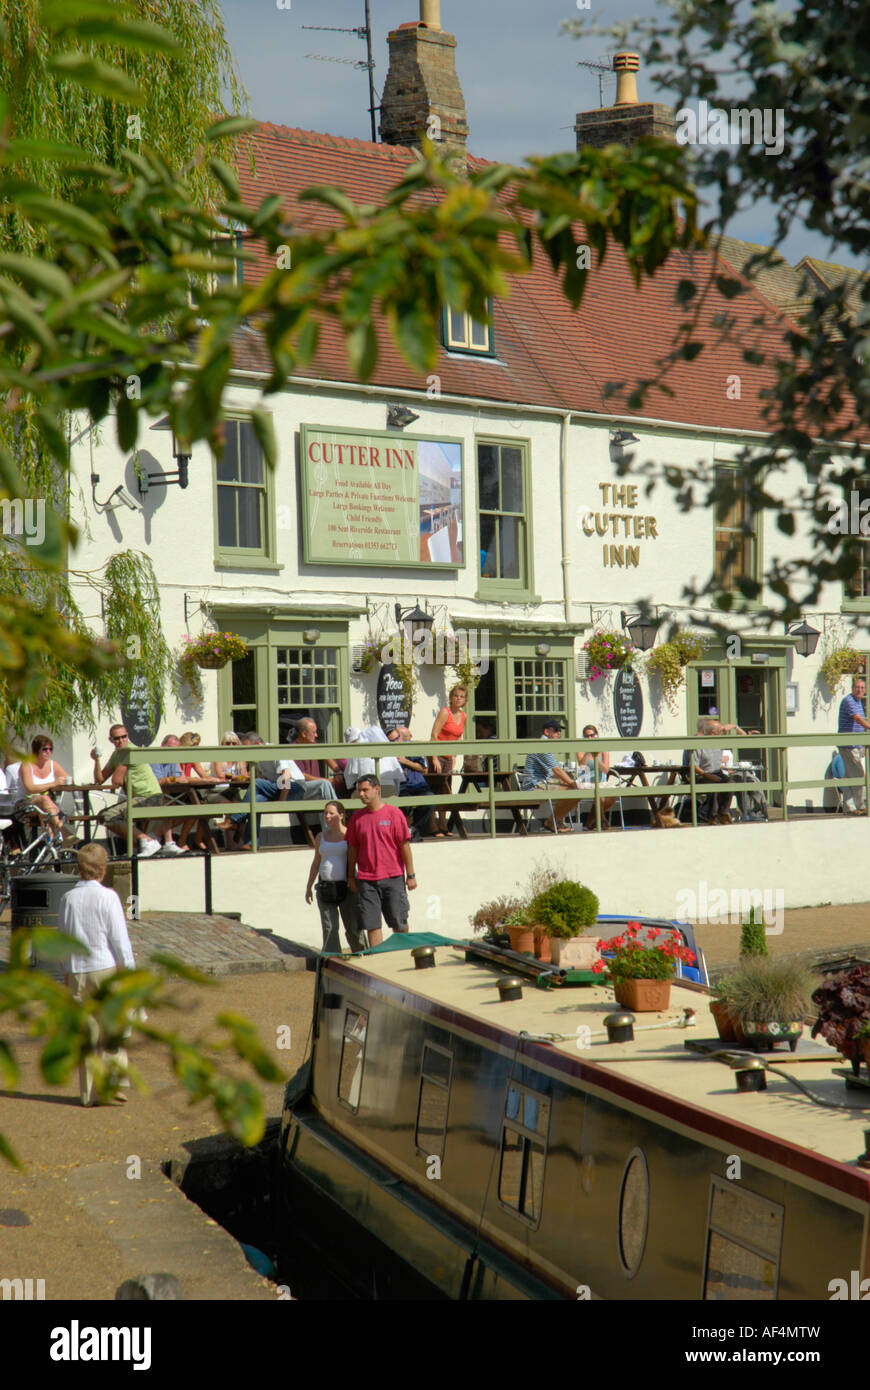 The Cutter Inn next to the River Great Ouse viewed through tree brances Ely Cambridgeshire England Stock Photo